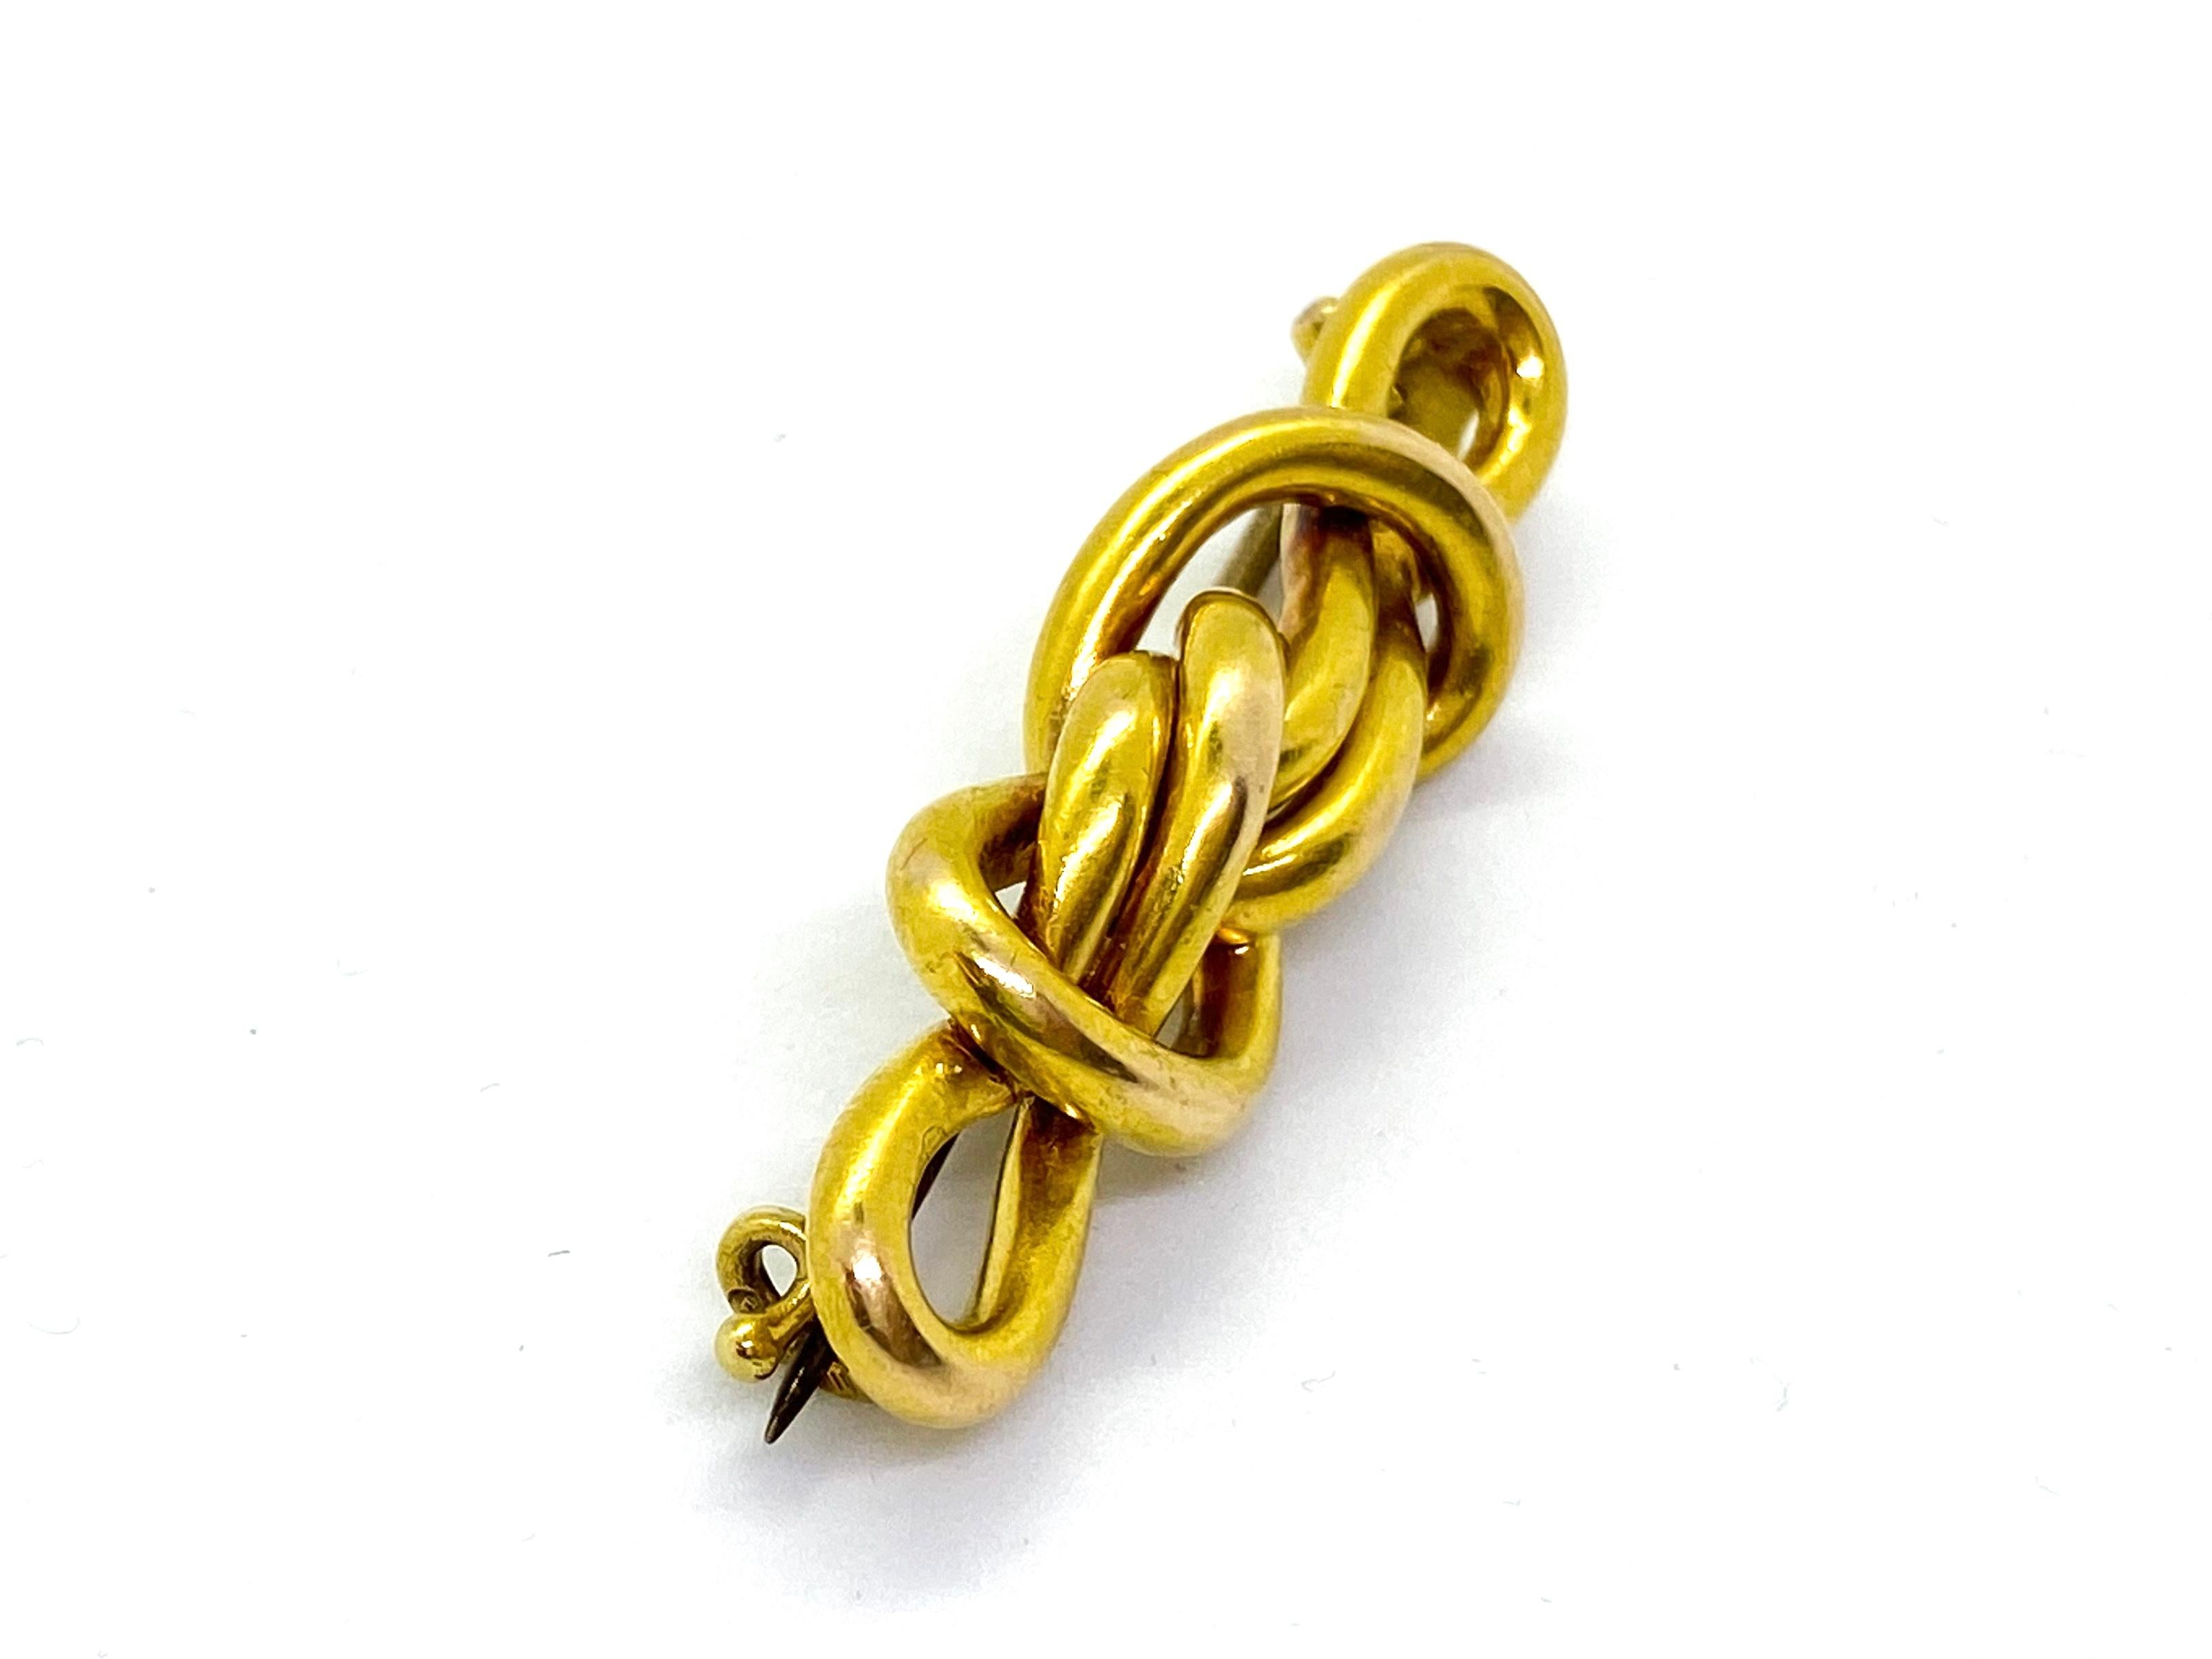 14 Carat Yellow Gold Mikhail Perchin Fabergé Knot Brooch Russia For Sale 1